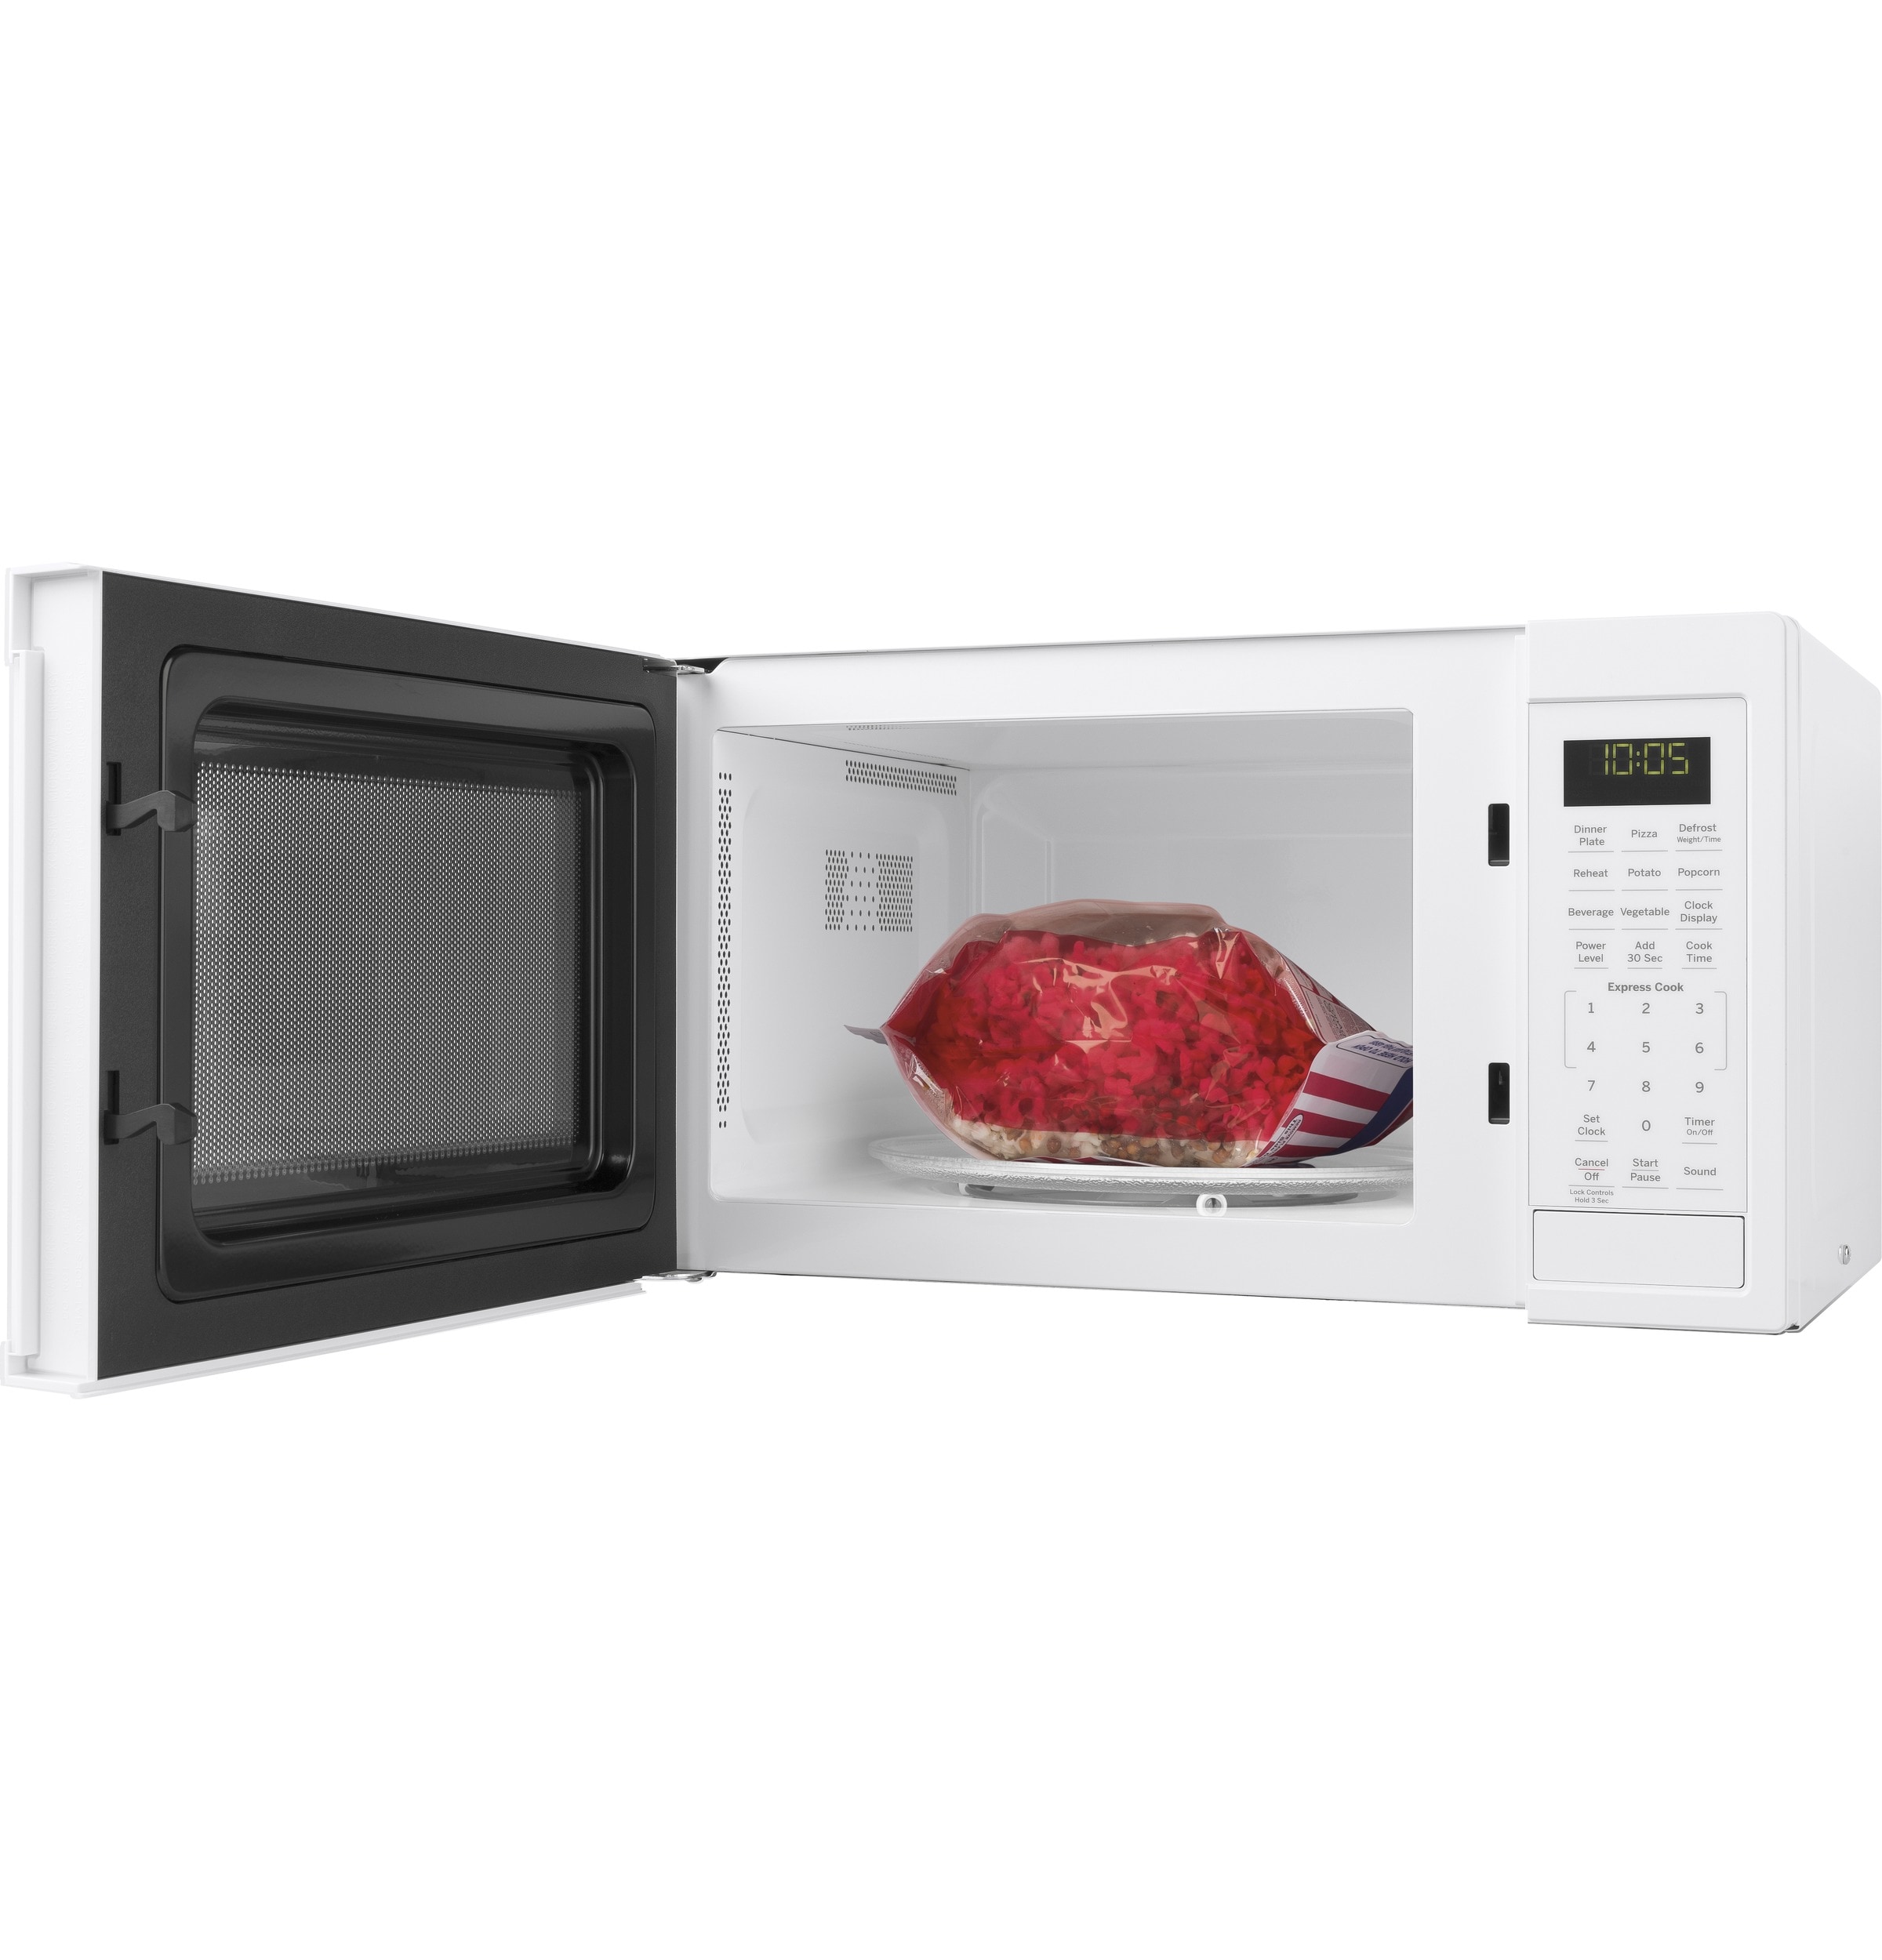 West Bend WBMW92W Microwave Oven 900-Watts Compact with 6 Pre Cooking  Settings, Speed Defrost, Electronic Control Panel and Glass Turntable, White